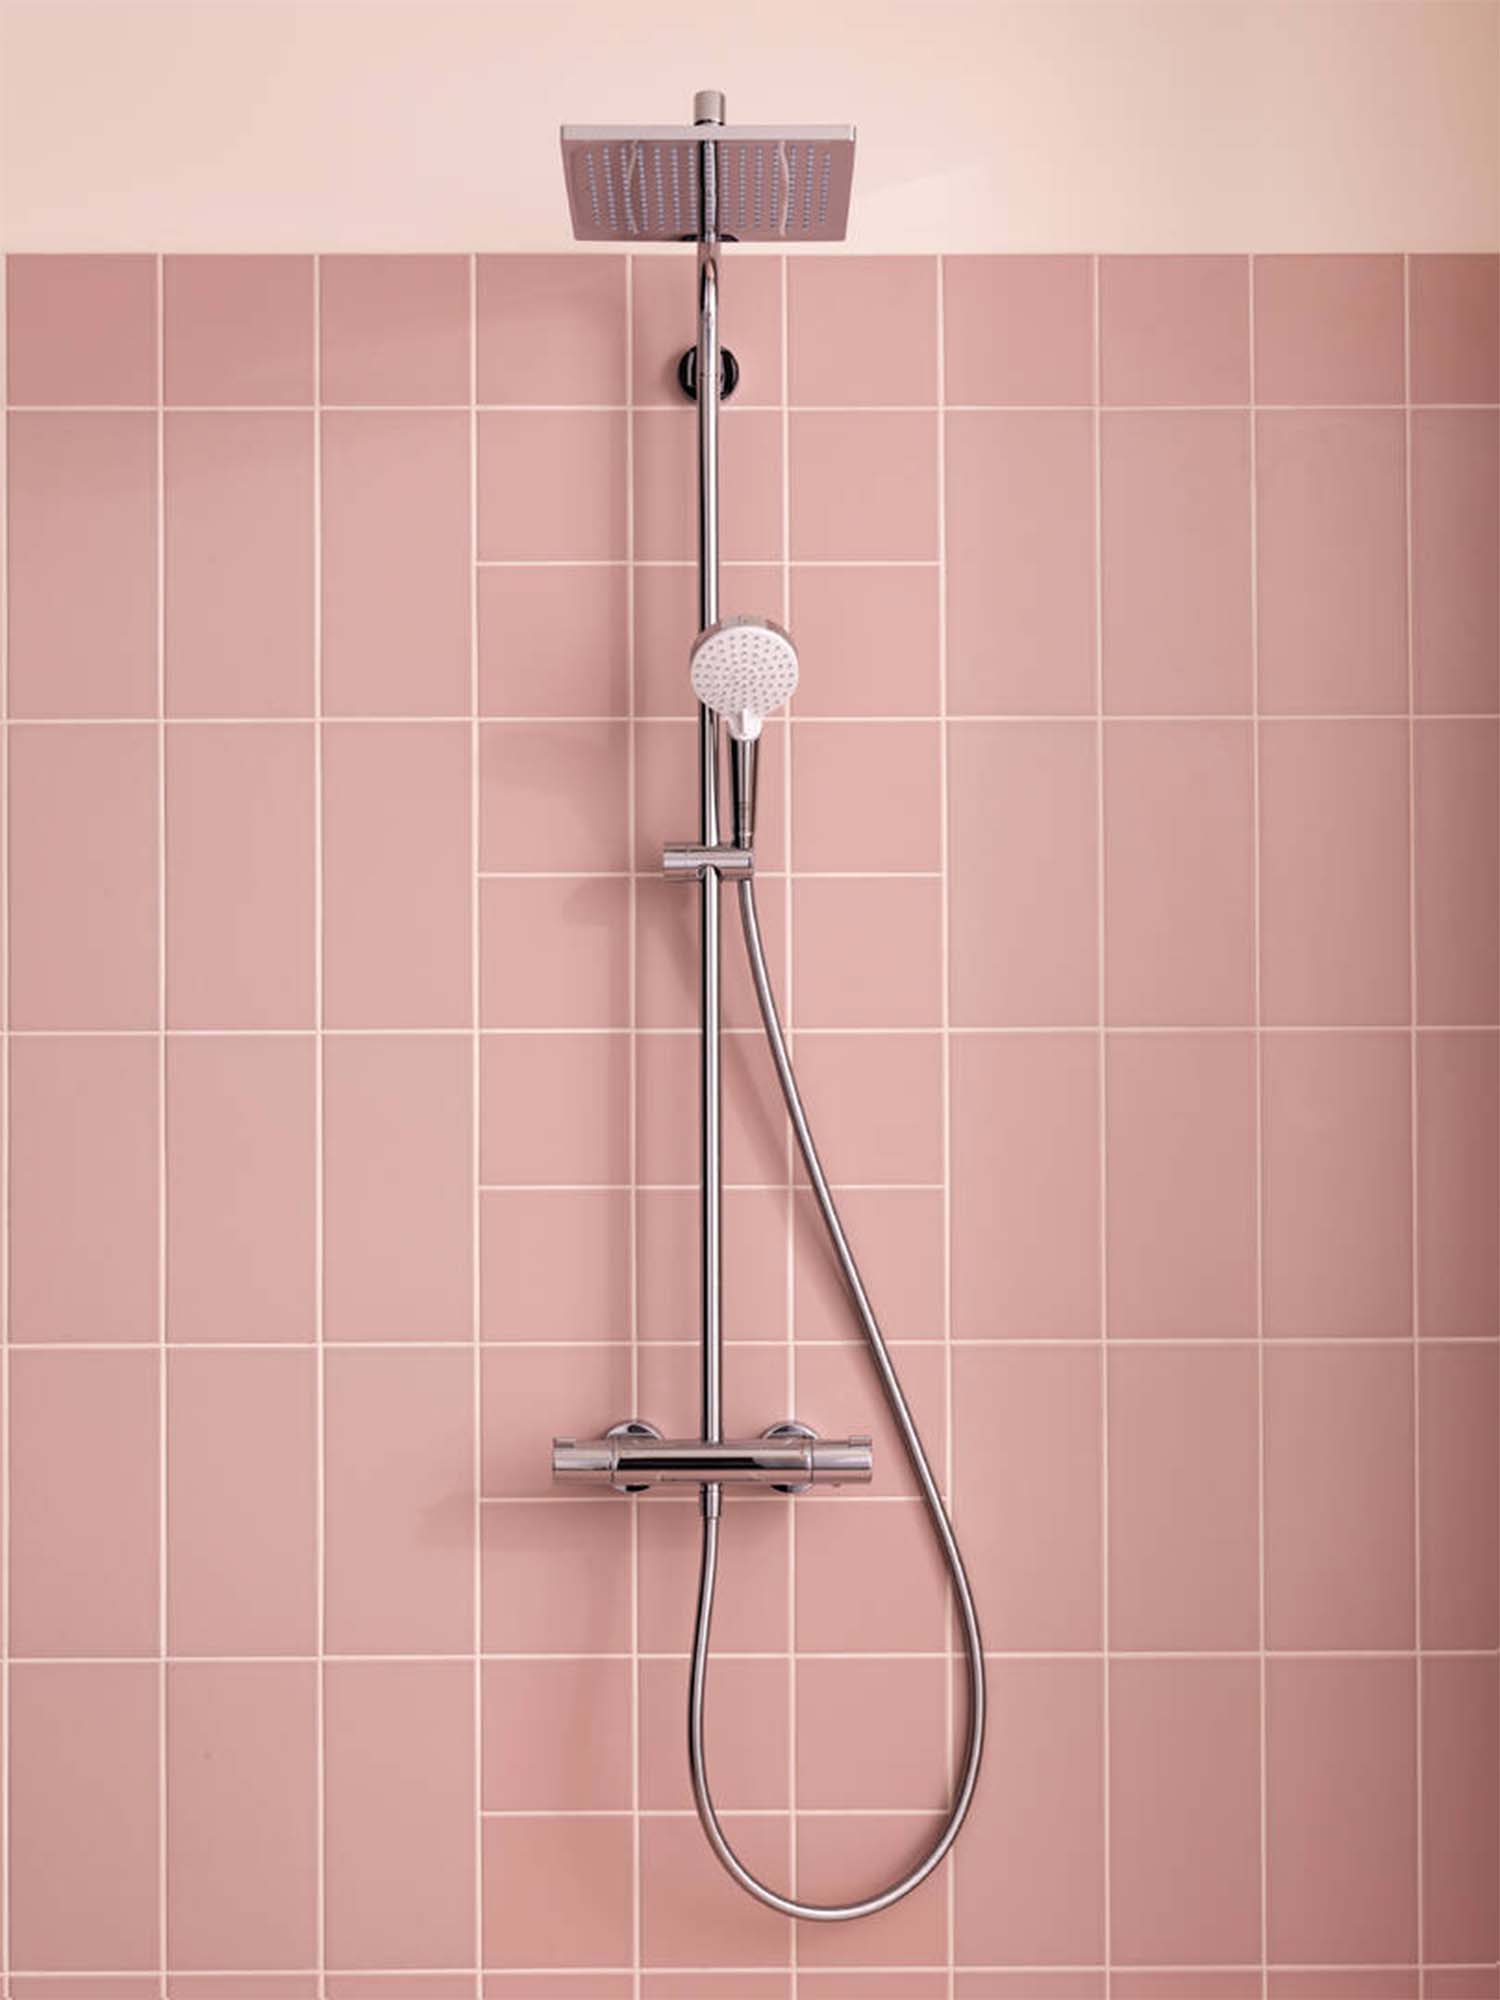 hansgrohe dual outlet thermostatic exposed bar valve with croma 240 rigid riser kit chrome